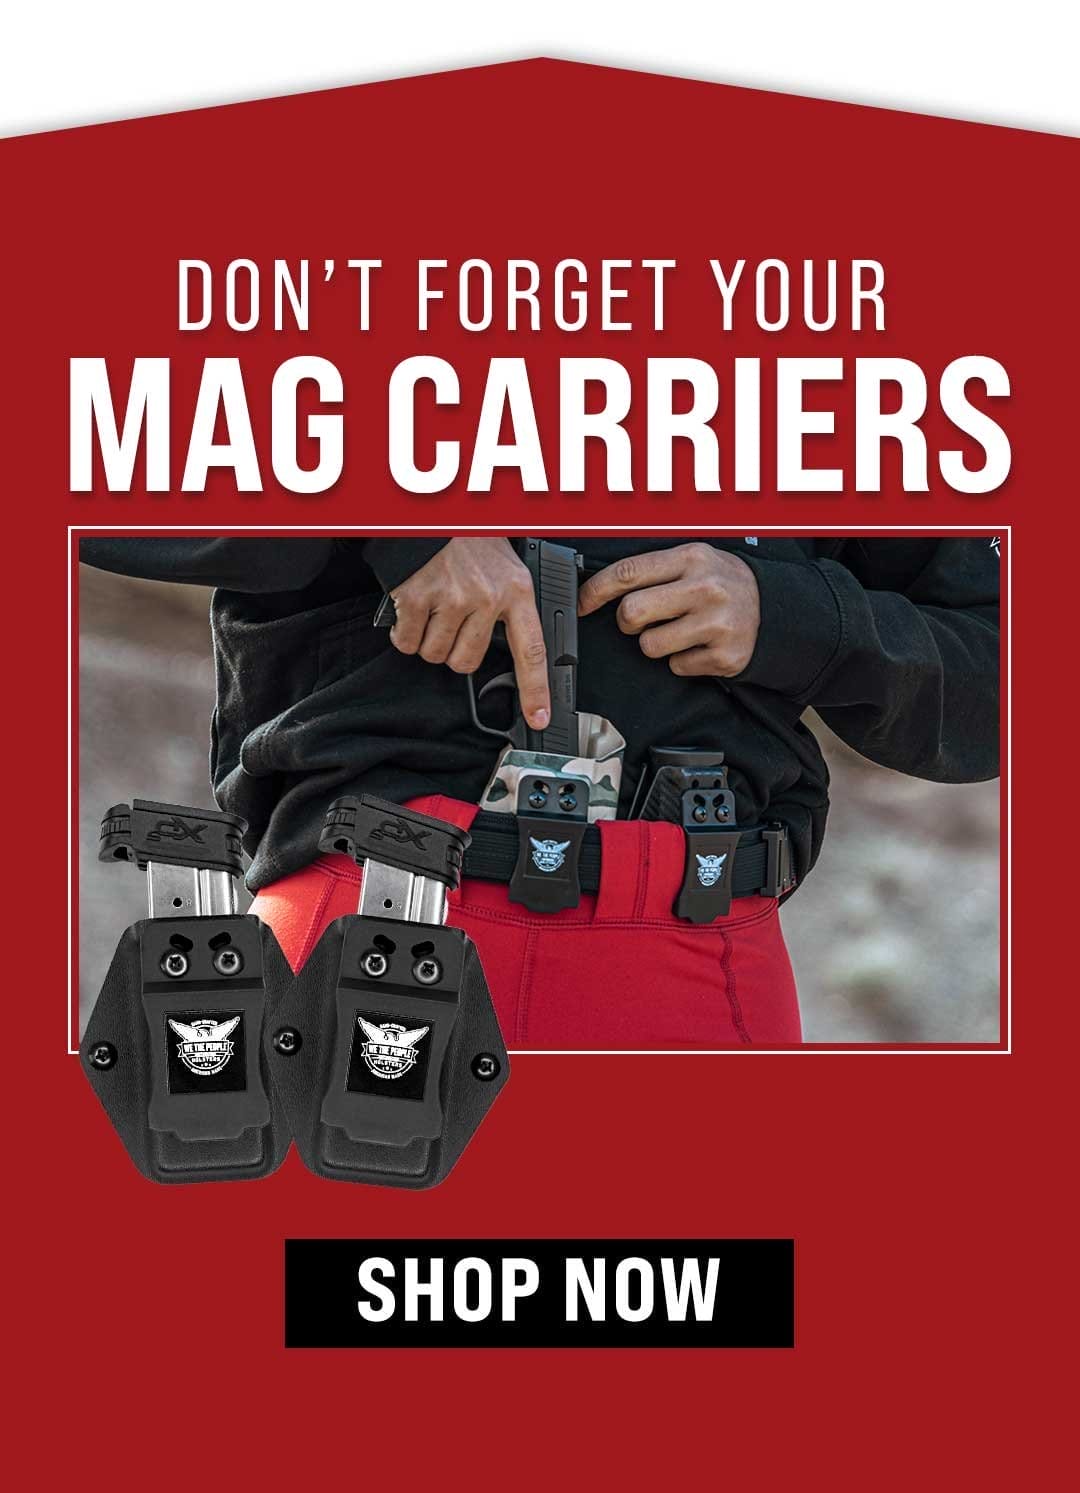 Don't forget the mag carriers